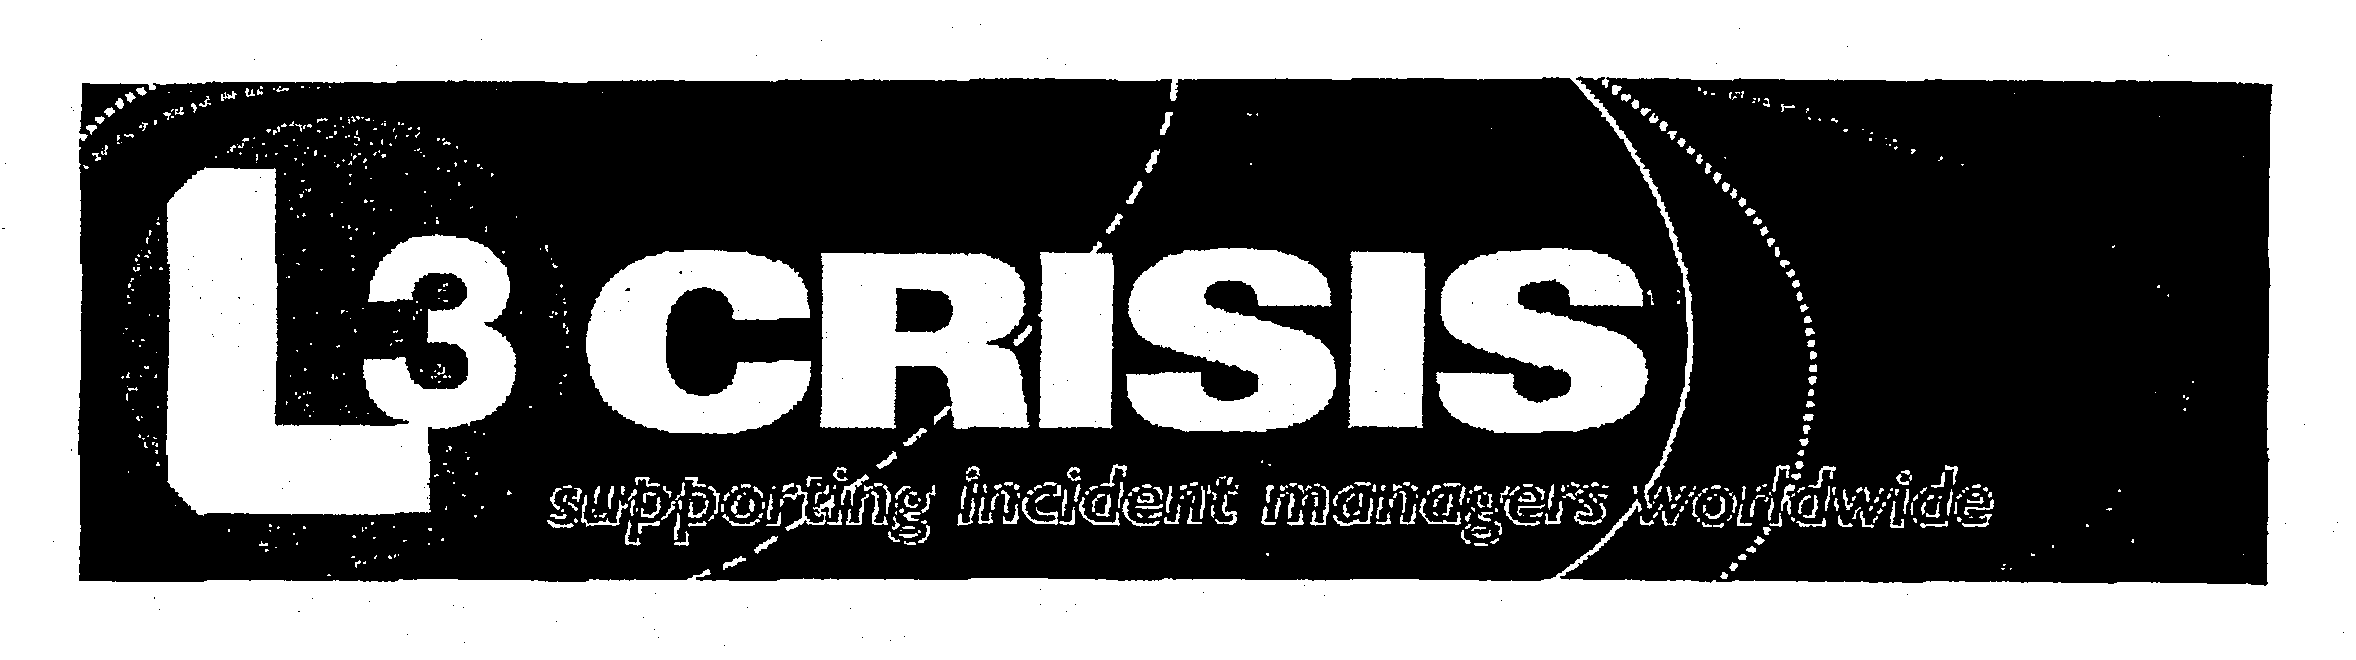  L3 CRISIS SUPPORTING INCIDENT MANAGERS WORLDWIDE